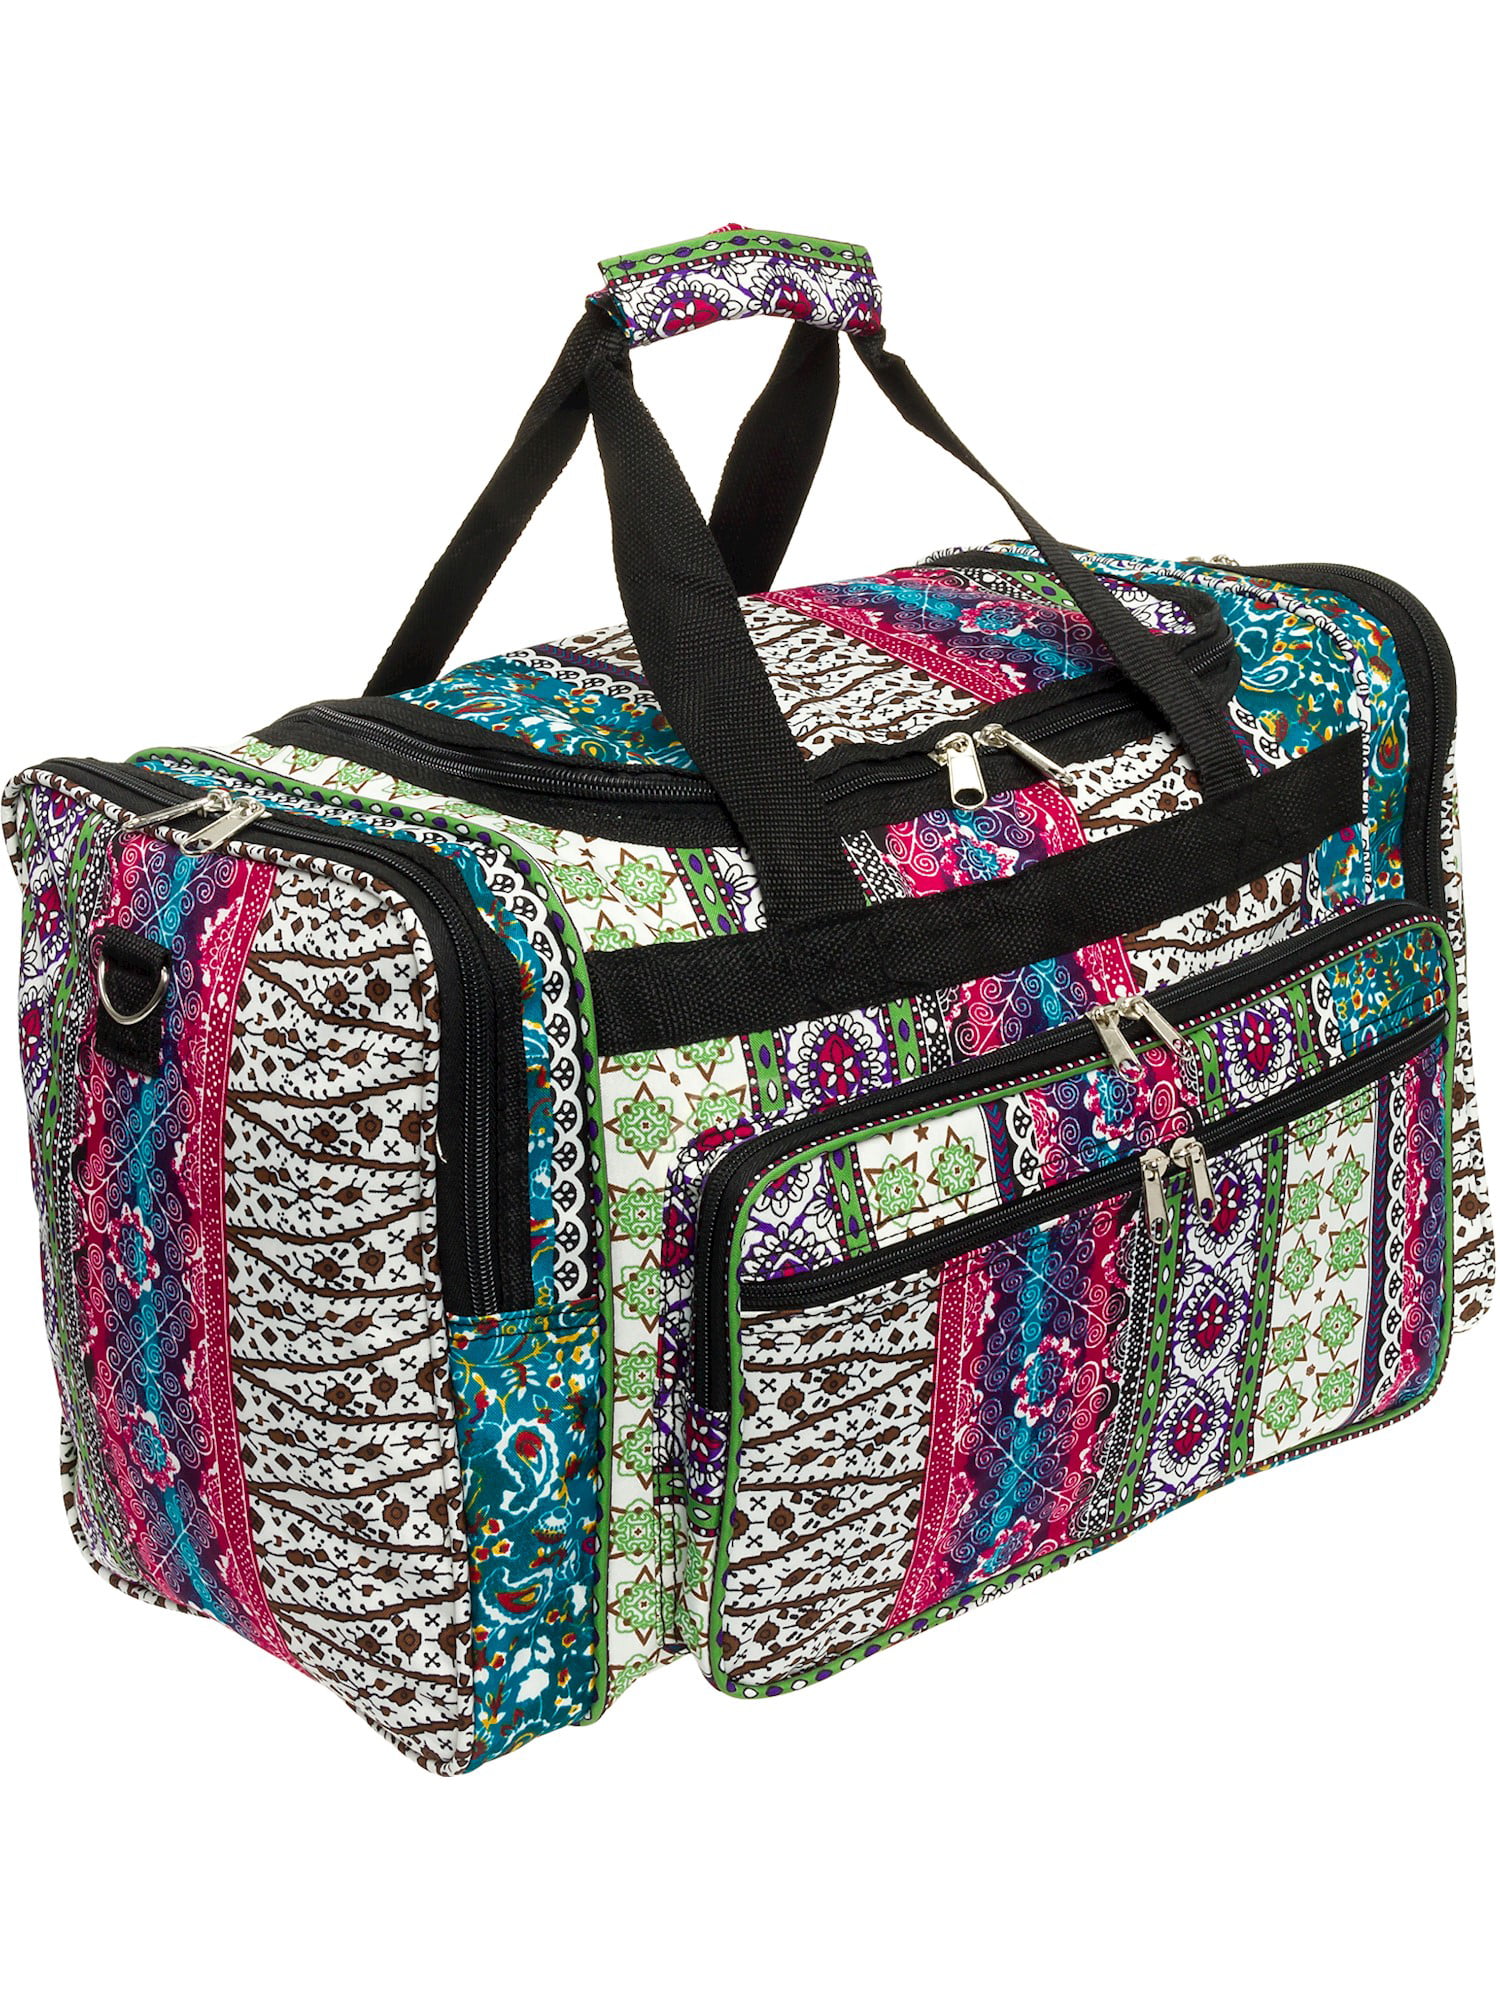 womens travel bags on sale